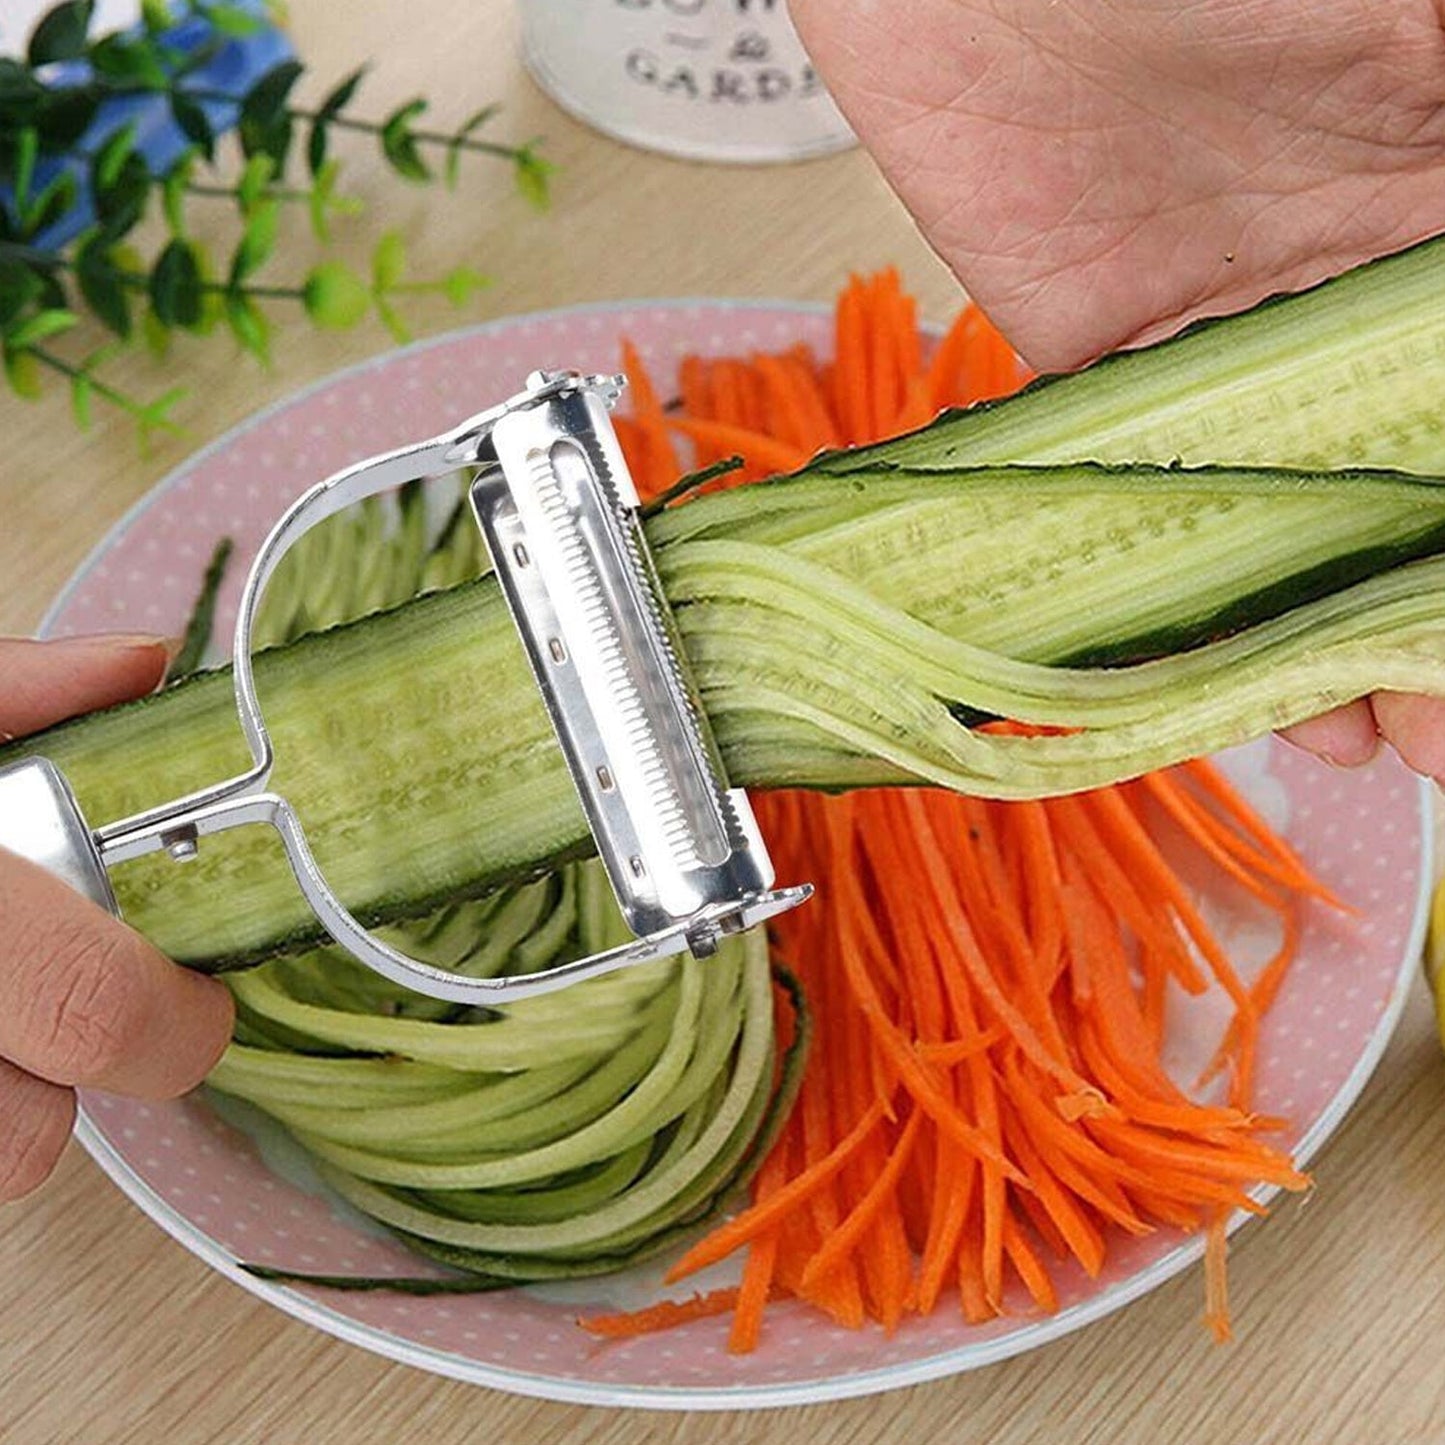 5505 Multi-Function 2 in 1 Potato Peeler and Julienne Cutter, Stainless Steel Potato Peeler, grated Carrot, grated, Suitable for Peeling and shredding Fruit and Vegetables Kitchen Accessories (1 Pc)